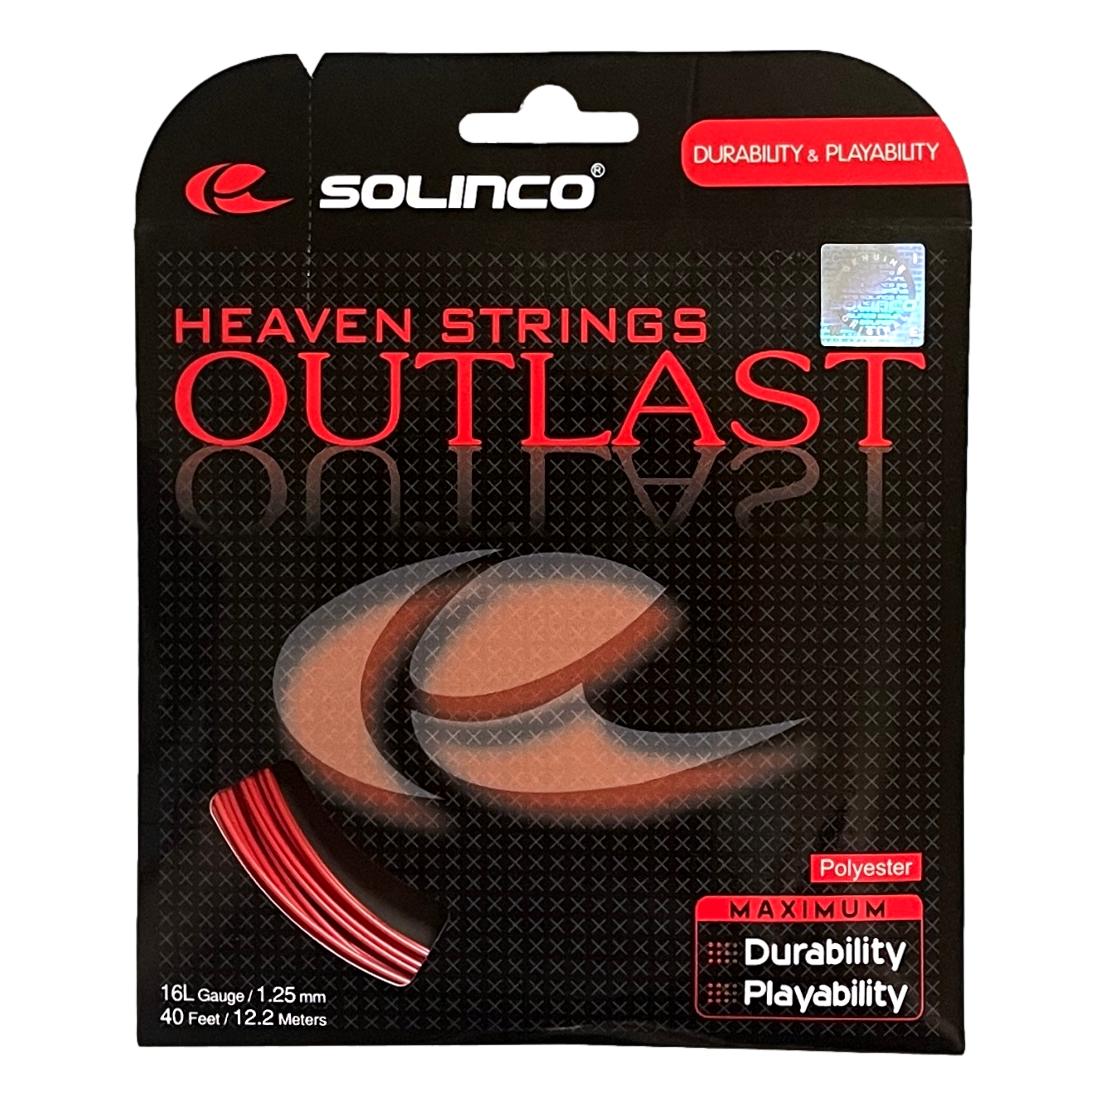 Solinco Outlast 16L Tennis String - Unmatched Performance and Durability